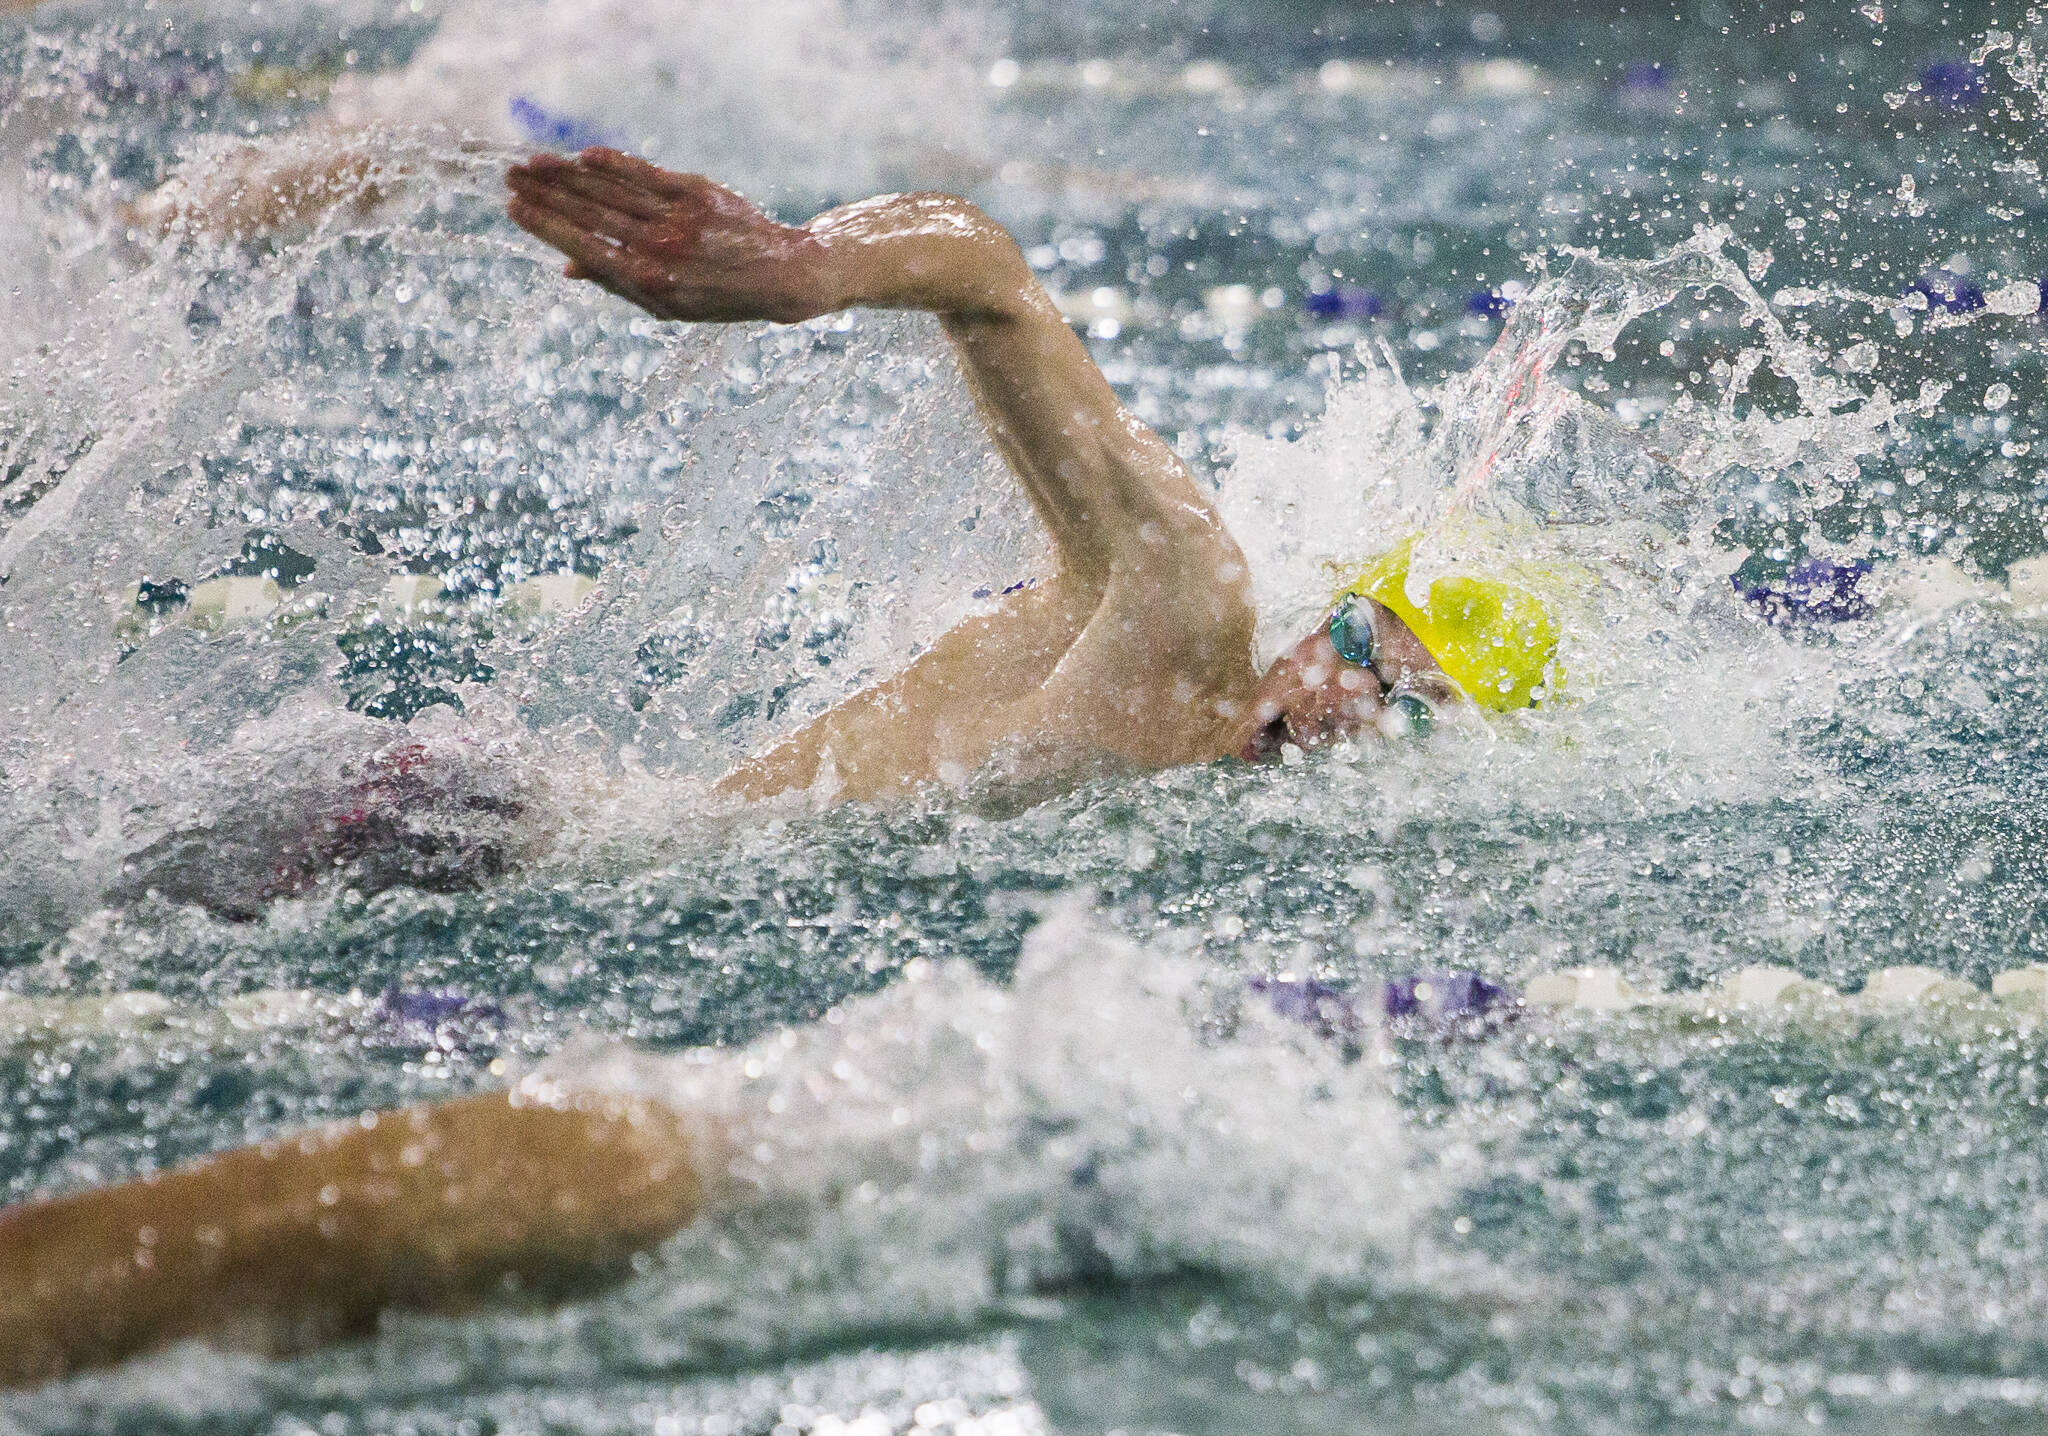 Shorecrestճ Sean Neils swims in the 100 Yard Freestyle during the 3A Boys Districts swim meet on Saturday, Feb. 12, 2022 in Snohomish, Wa. (Olivia Vanni / The Herald)